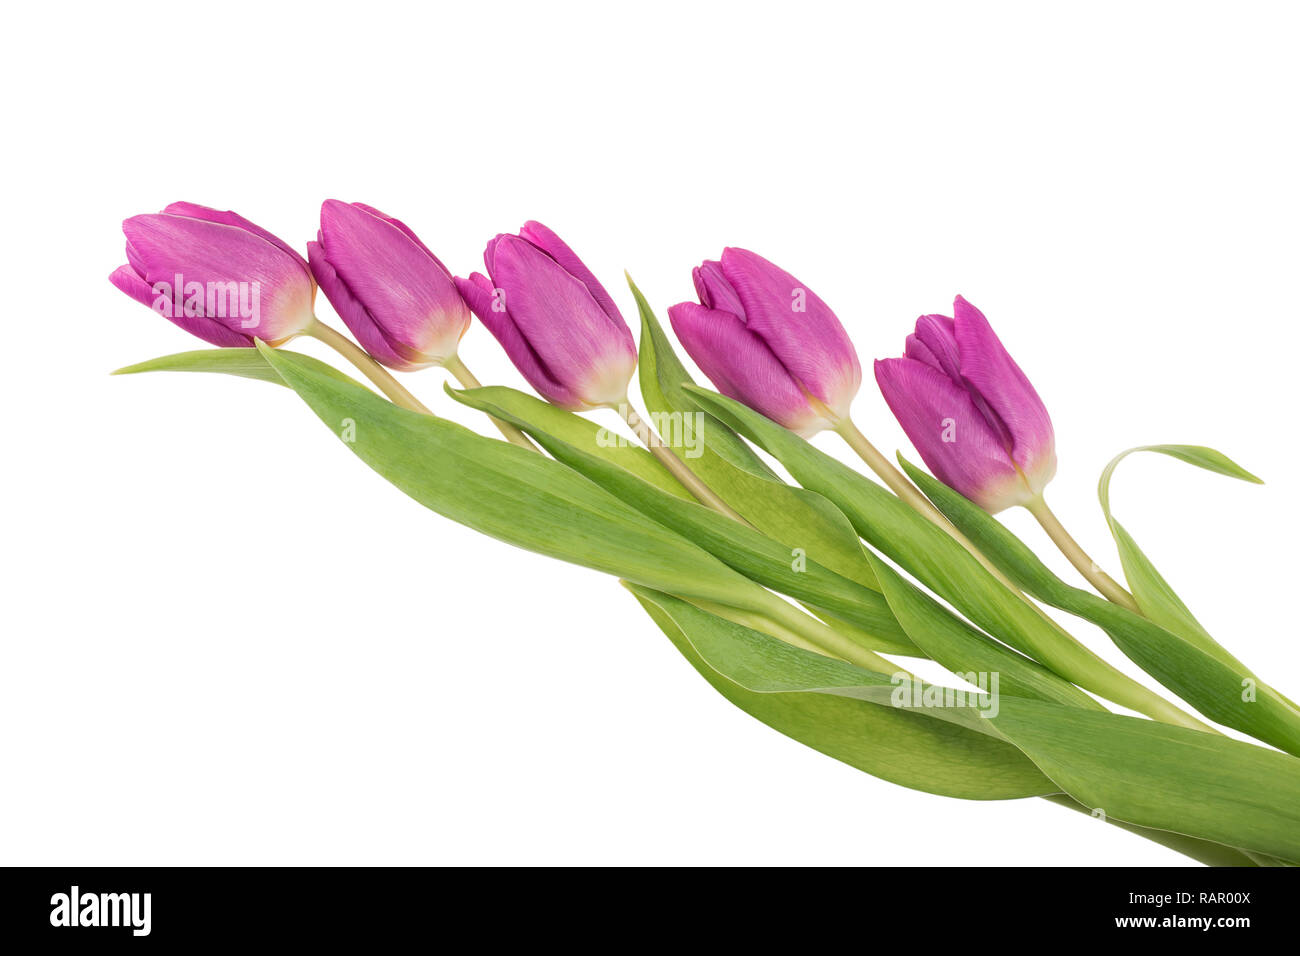 Composition of five purple tulips isolated on white background Stock Photo